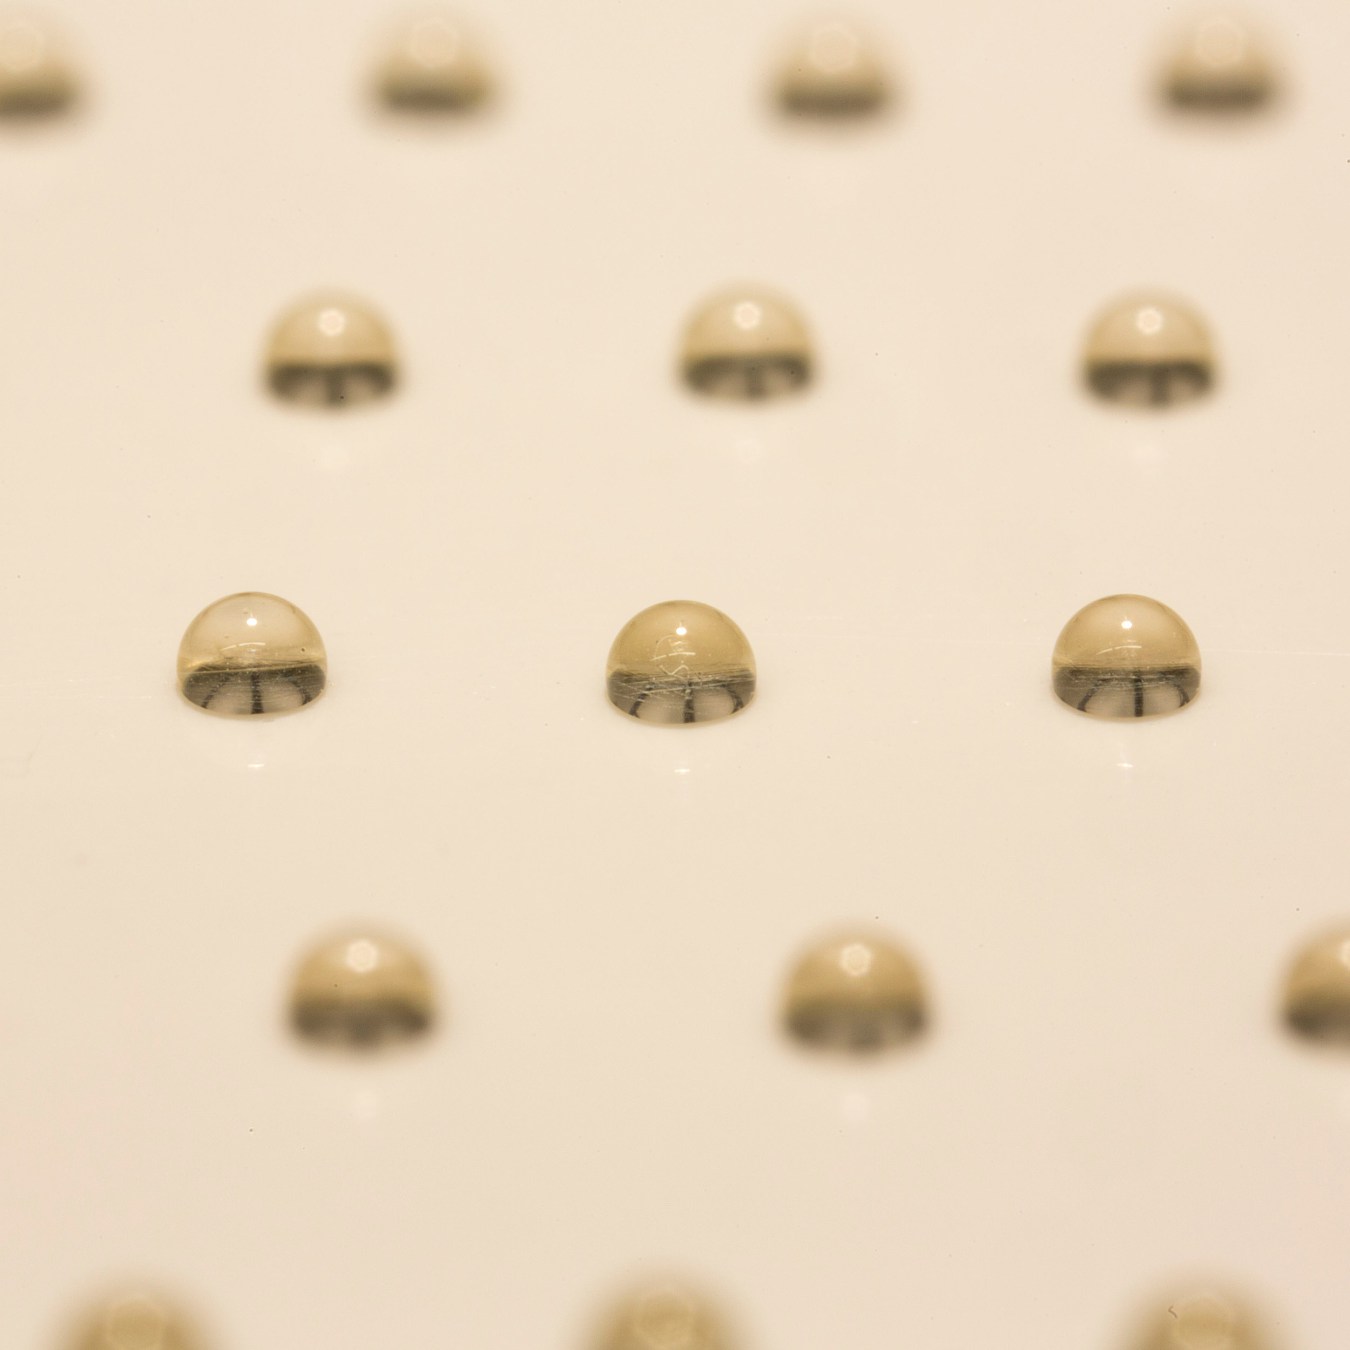 Honey drops patterned on a glass substrate using the controlled acoustophoretic printing head. Photo via Daniele Foresti & Jennifer A. Lewis/Harvard University